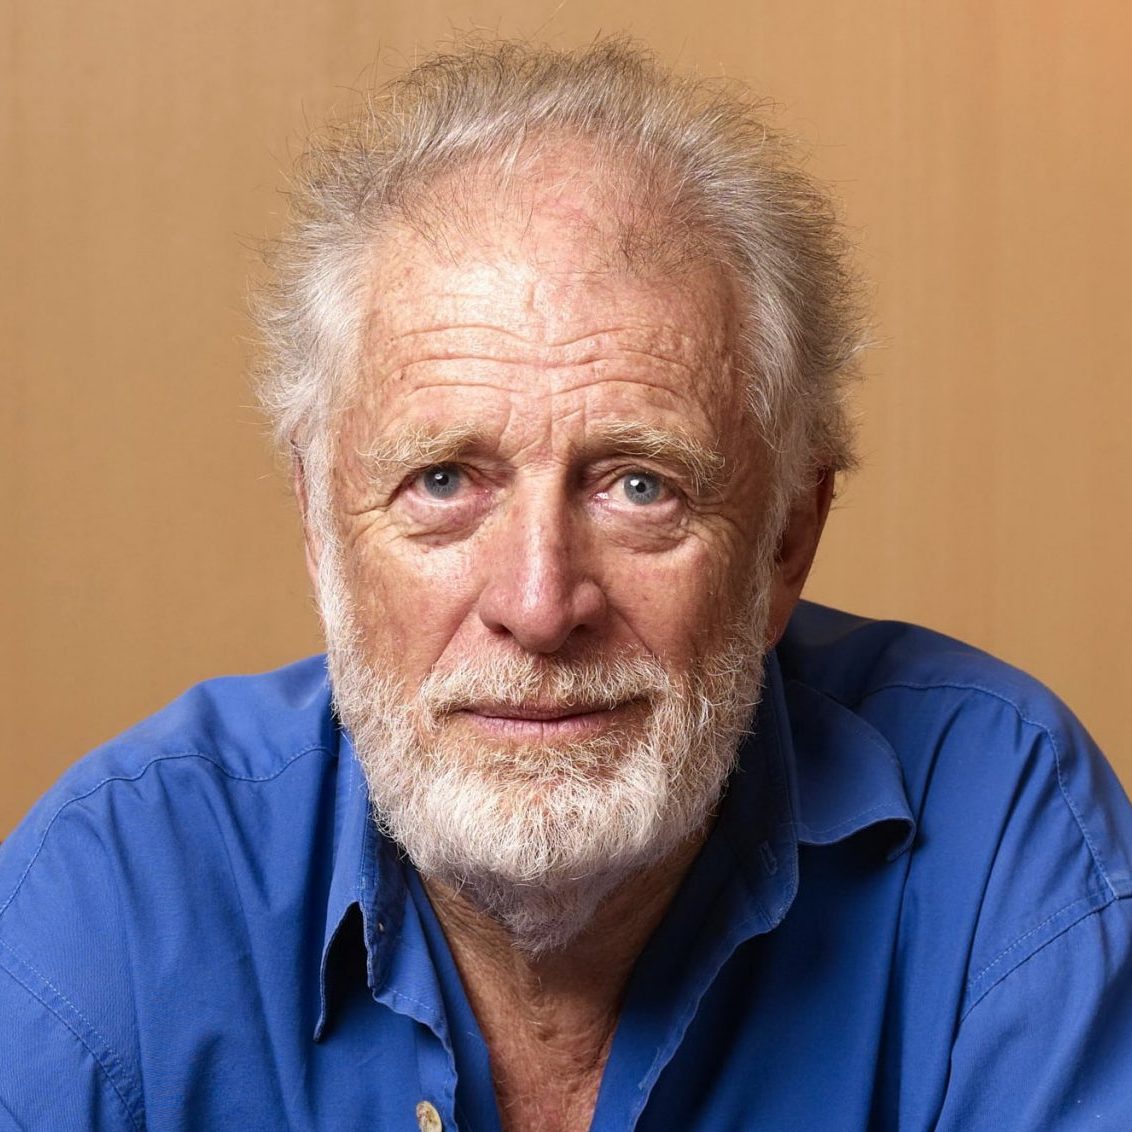 A golden eye: The vision of Chris Blackwell: Travel Weekly